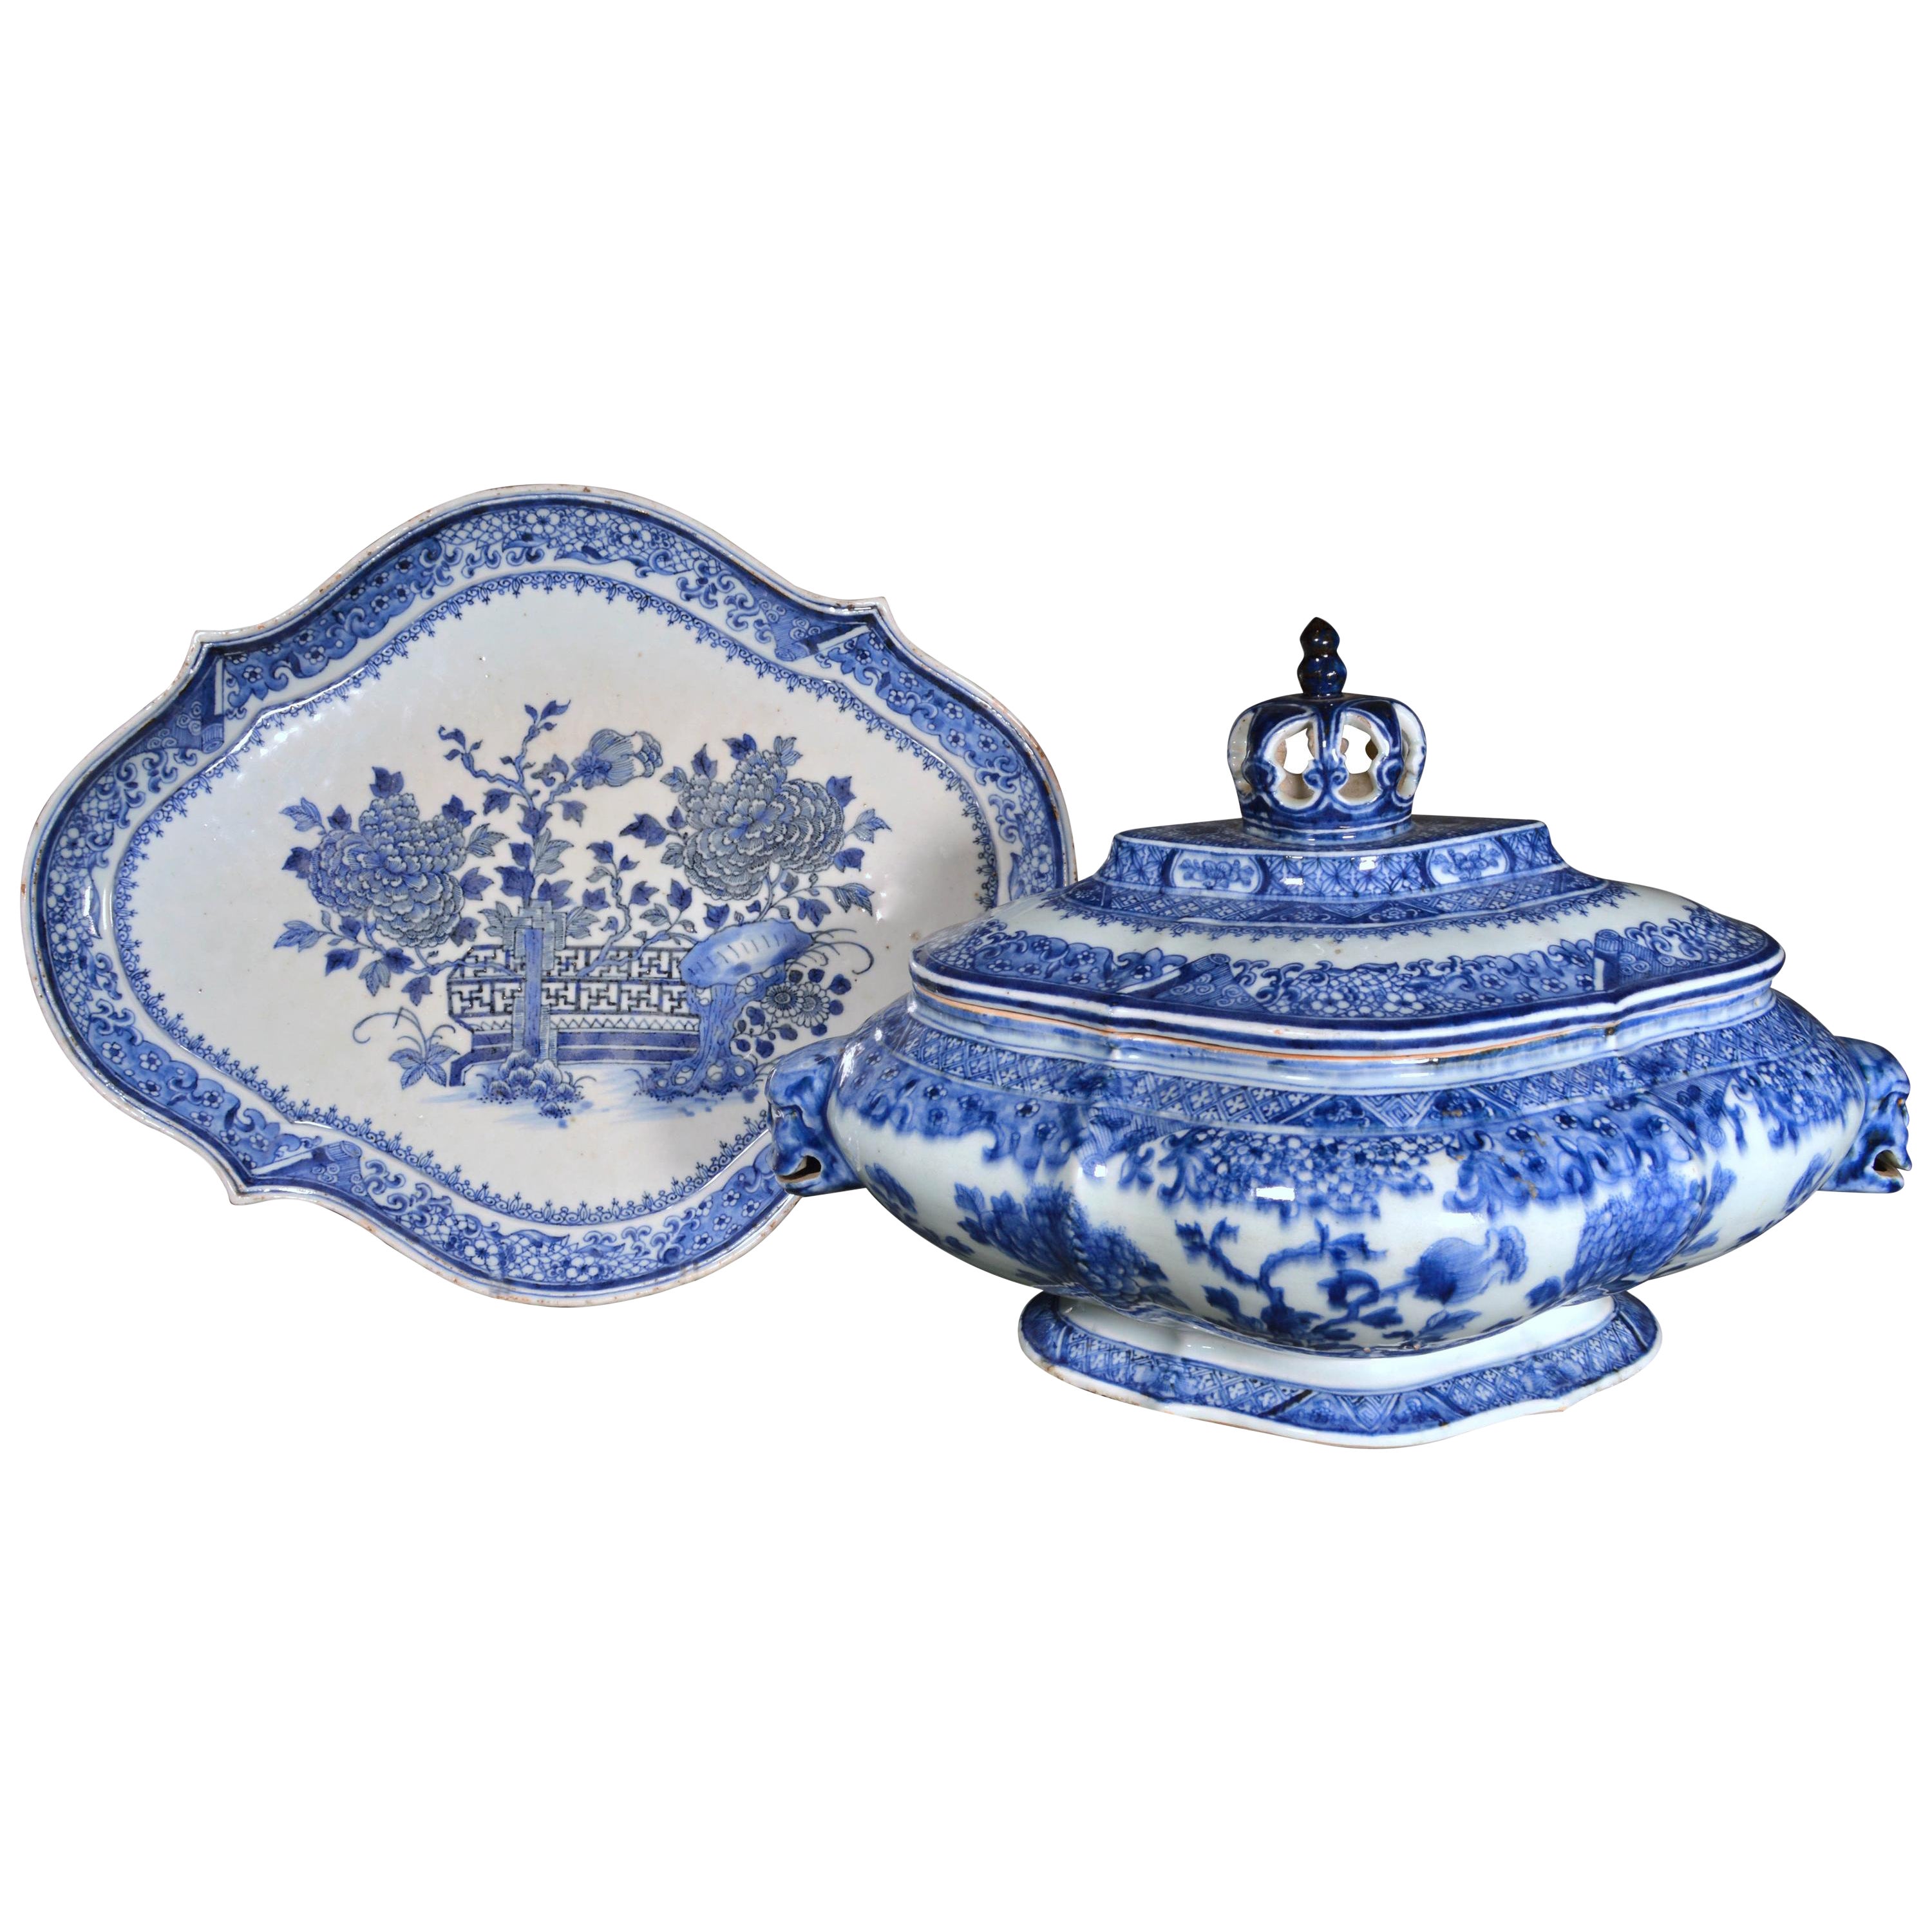 Early Chinese Export Porcelain Blue and White Soup Tureen, Cover and Stand For Sale